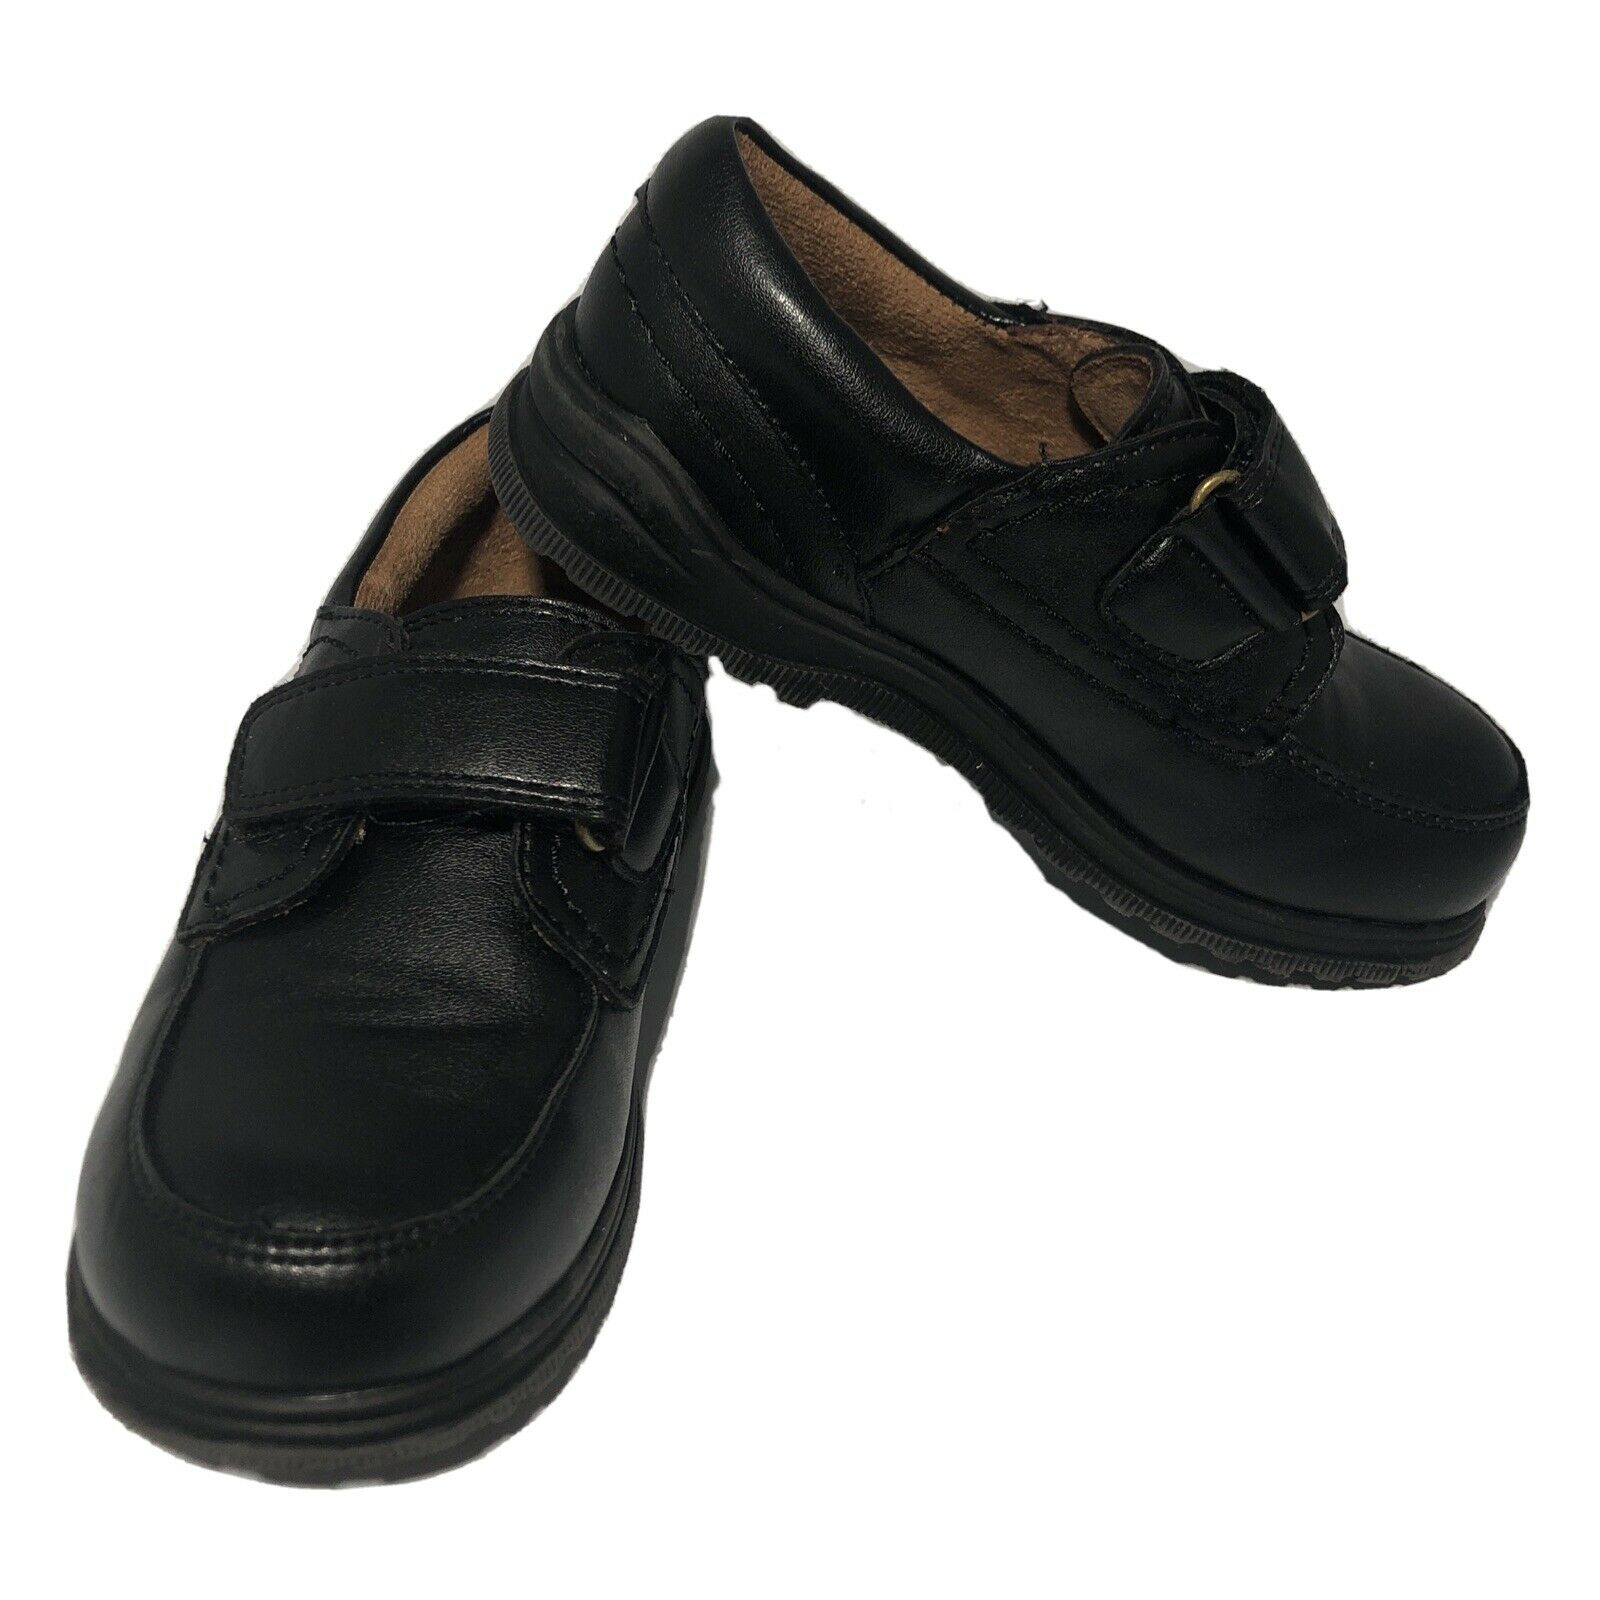 The CHILDRENS Place Black Boys Dress School Strap Shoes Toddler 11